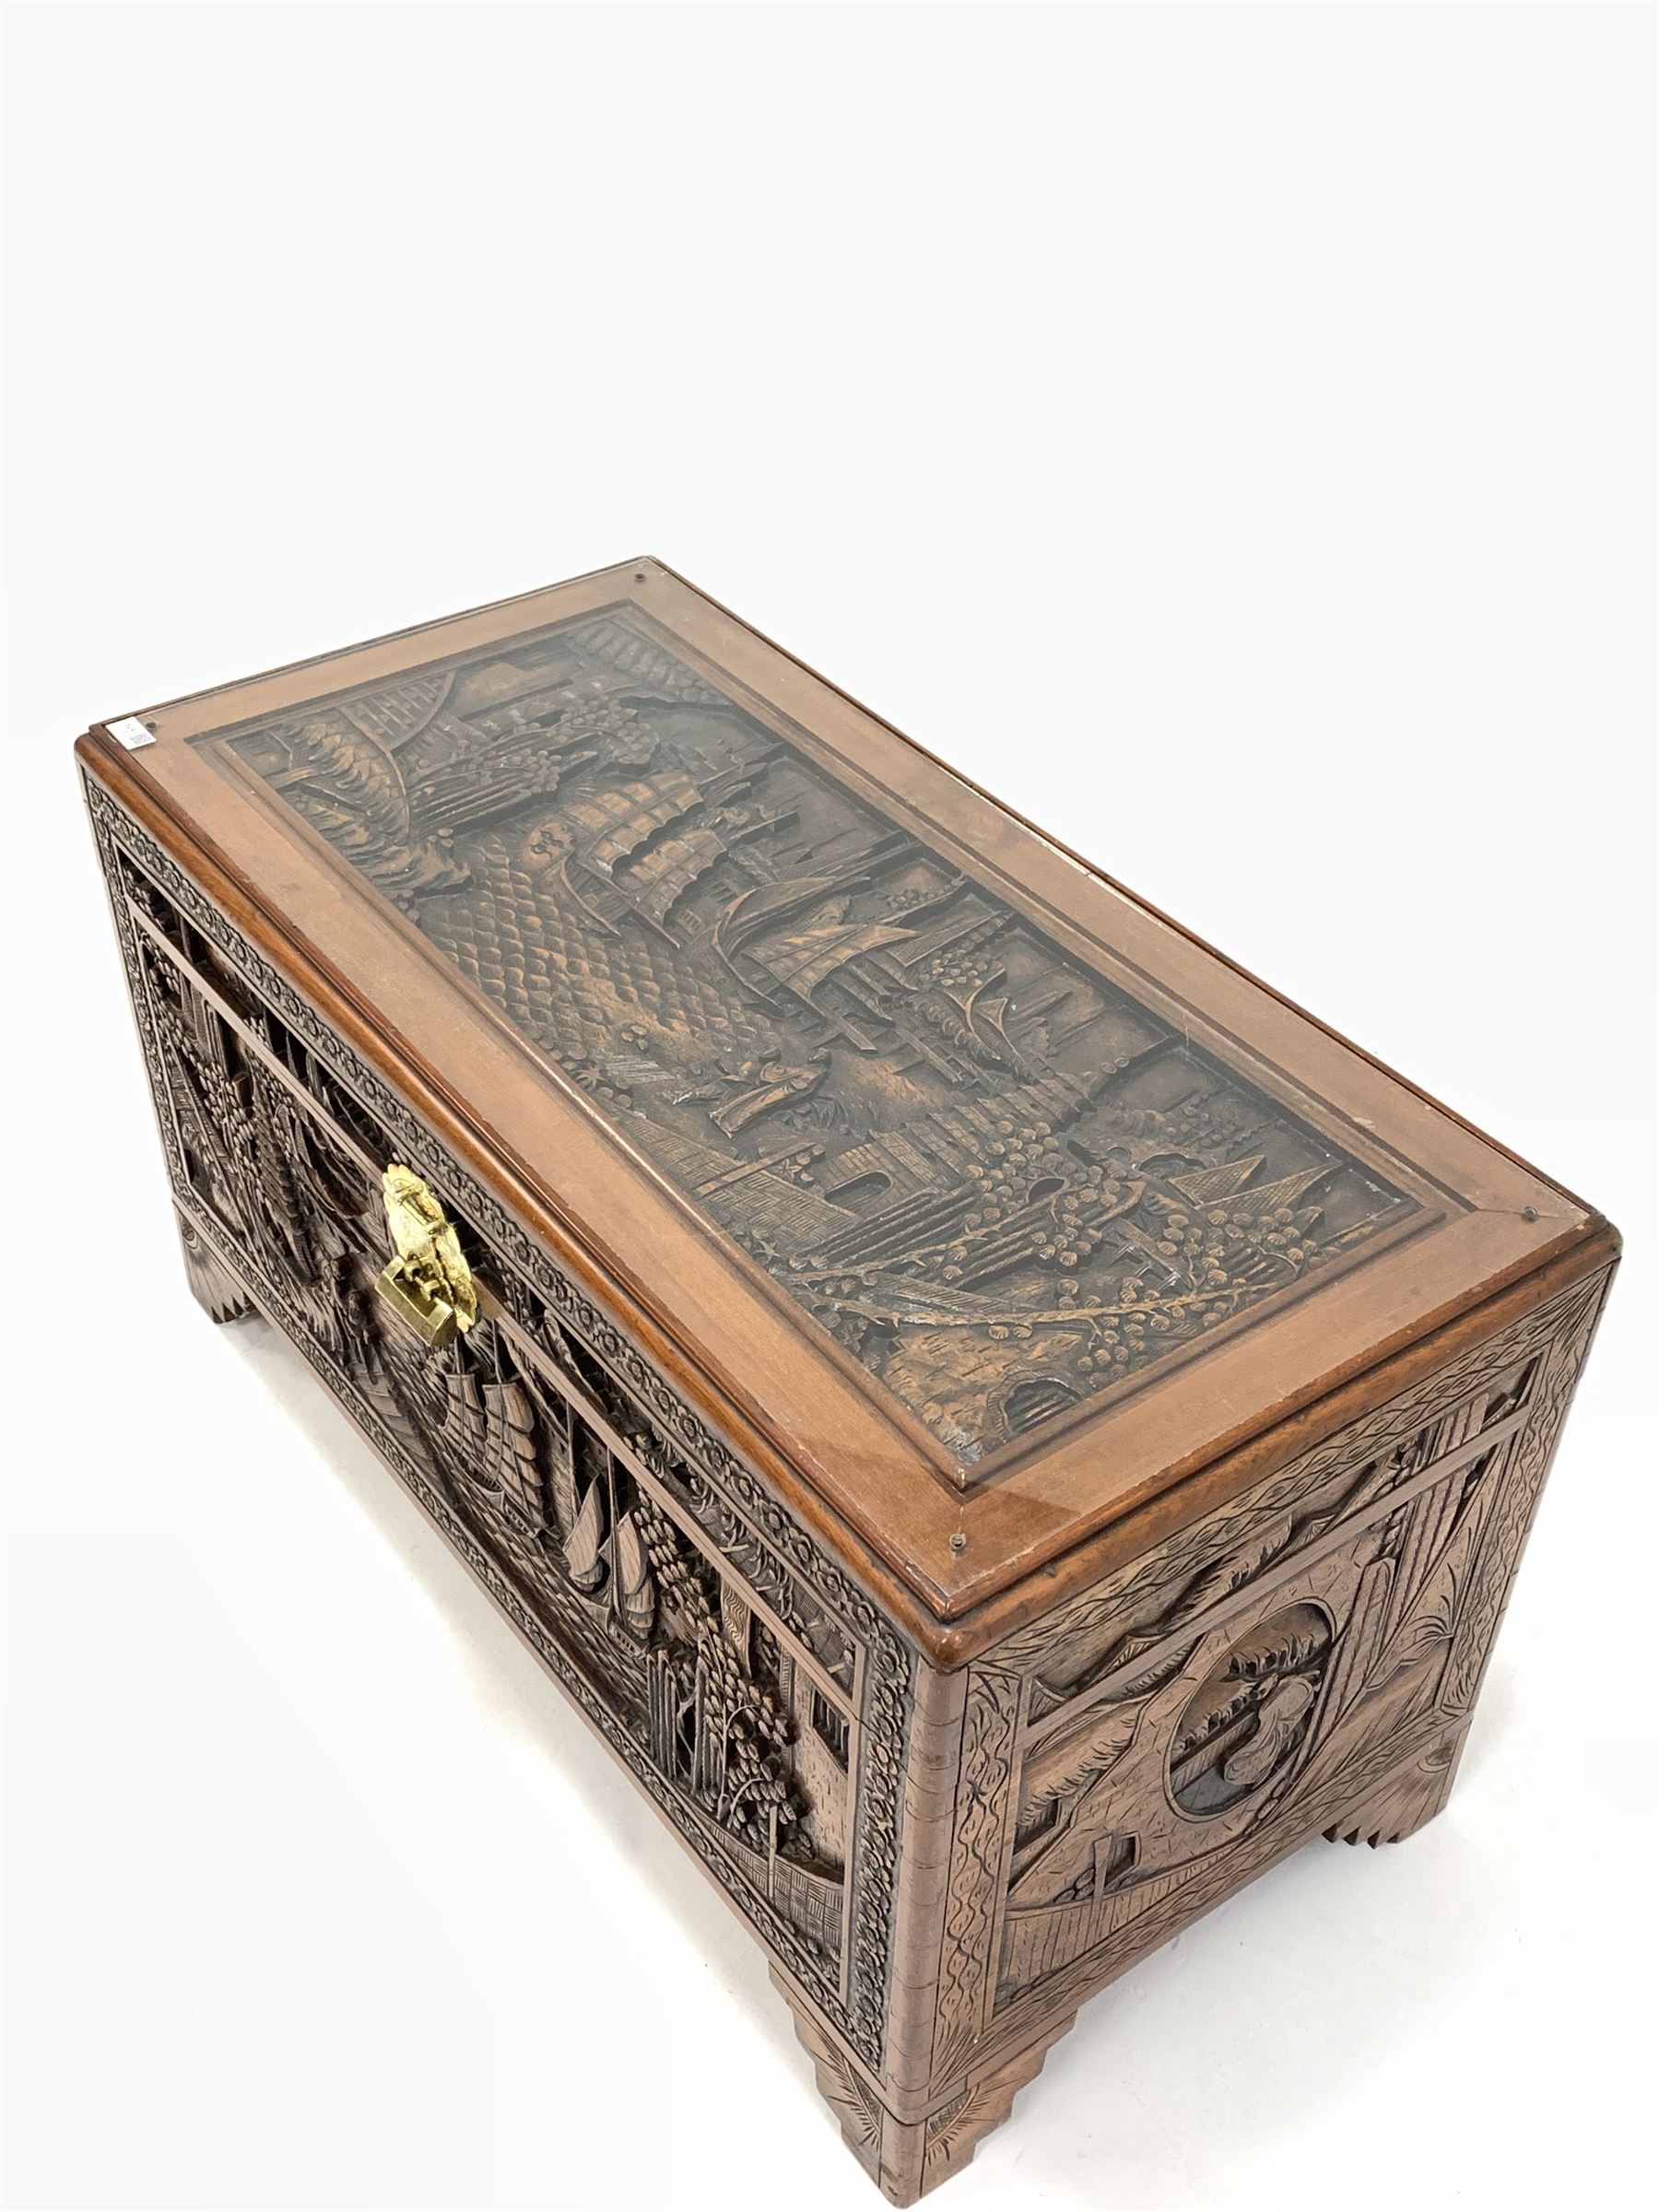 Chinese camphor wood chest - Image 3 of 4